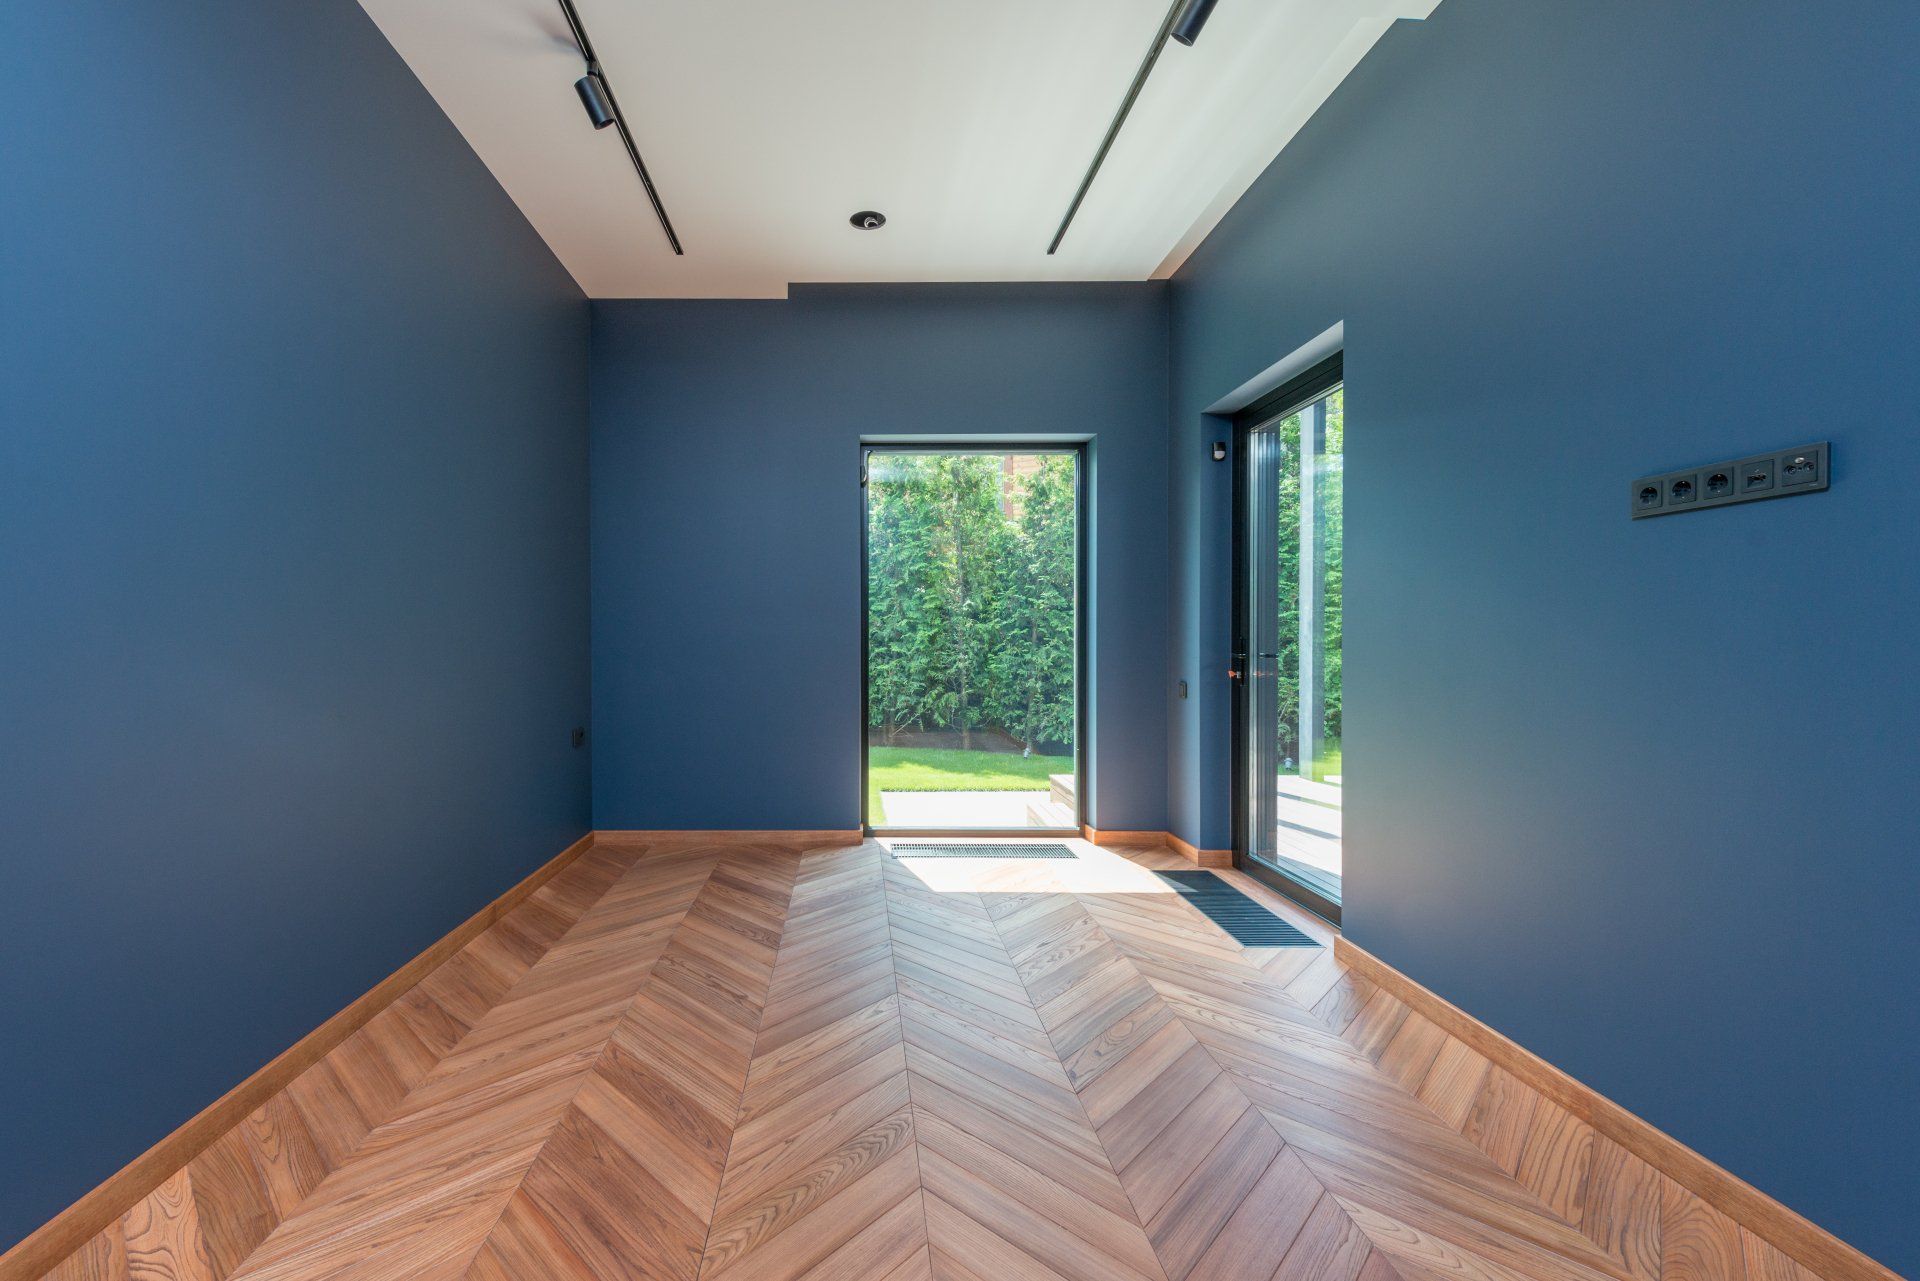 Room with blue walls painted and oak flooring